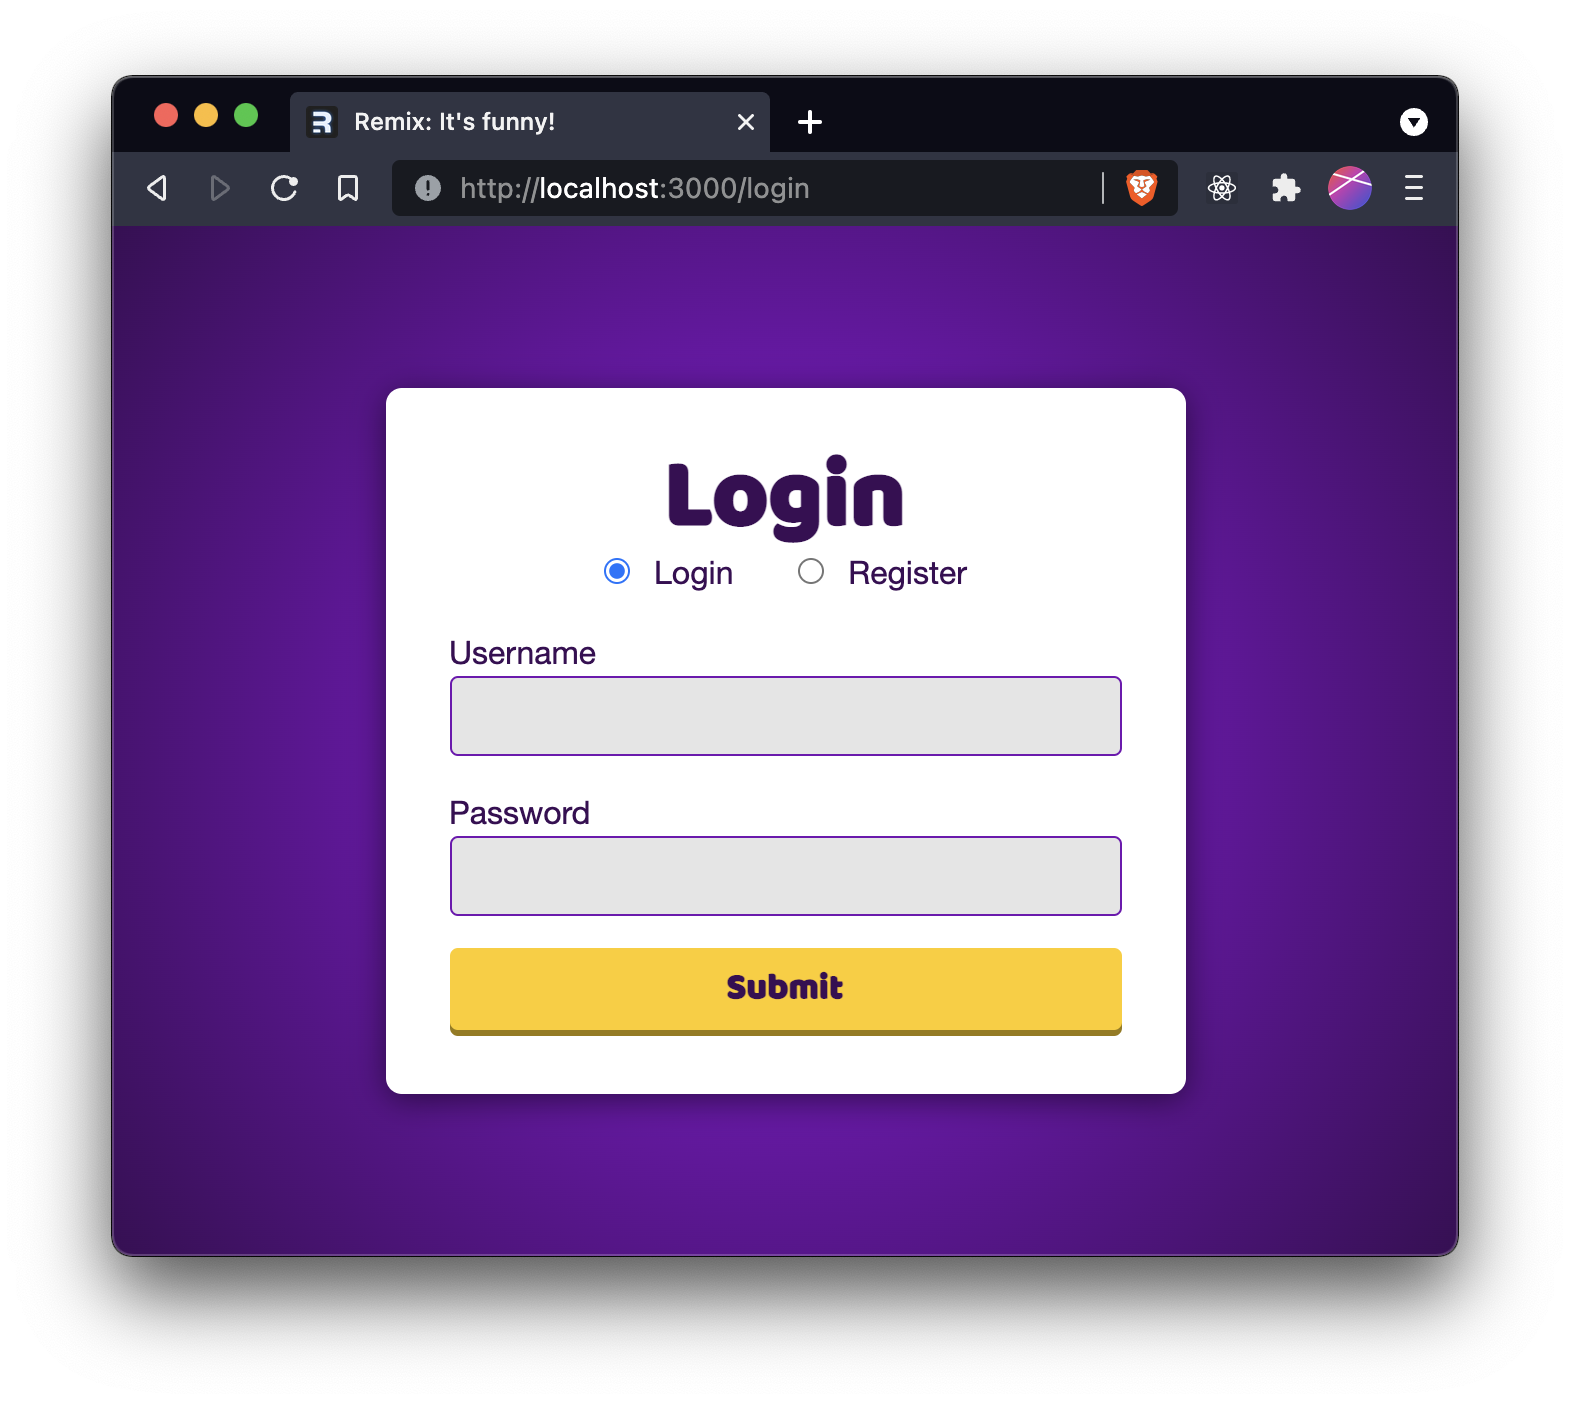 A login form with a login/register radio button and username/password fields and a submit button